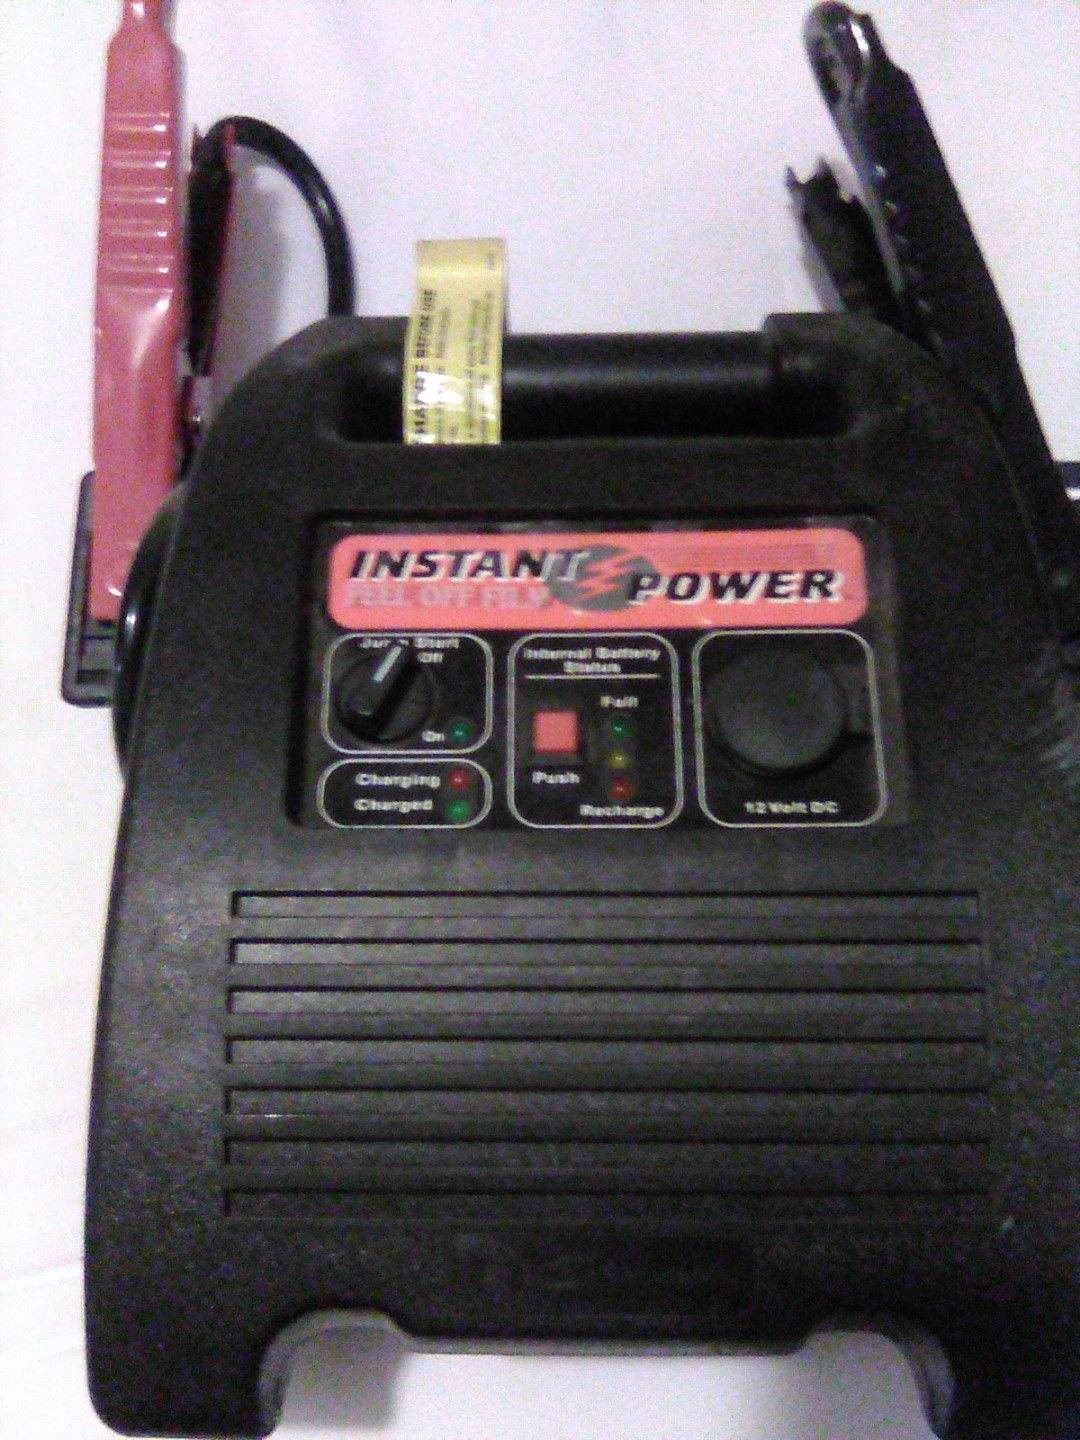 Schumacker battery charger and jump box